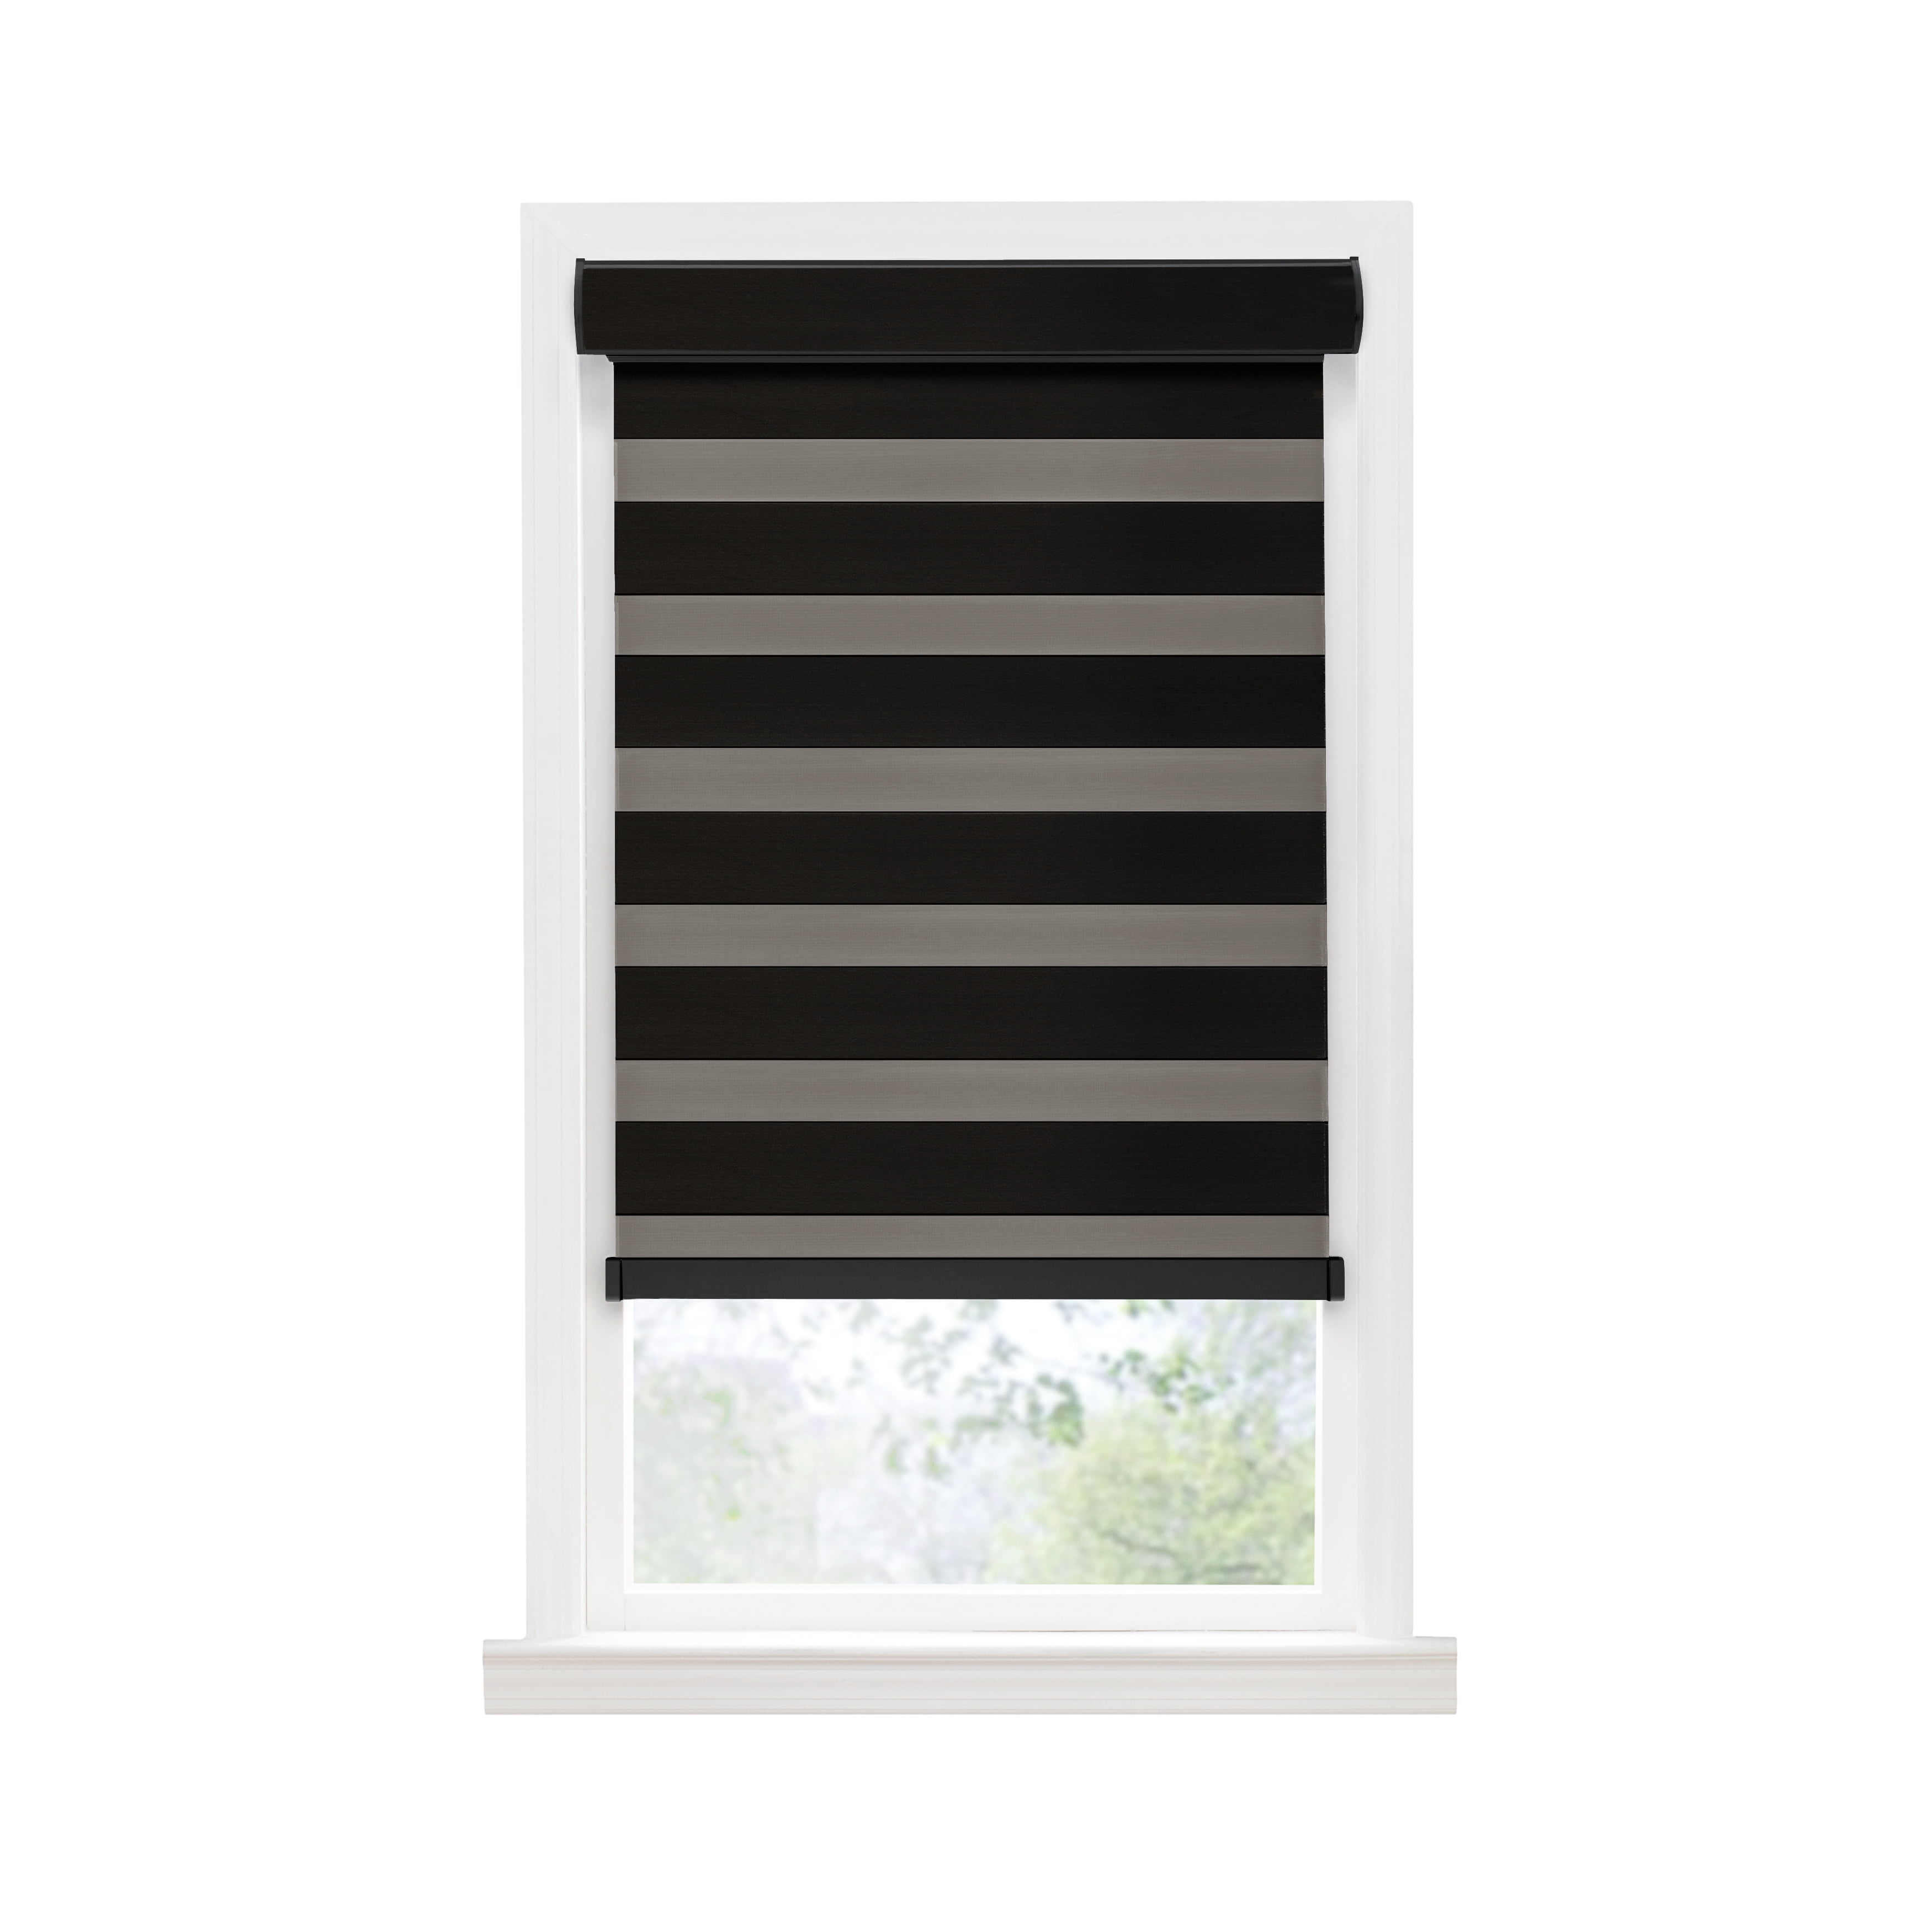 Details about   Achim Home Furnishings Cordless Celestial Sheer Double Layered Shade 33 x 72 